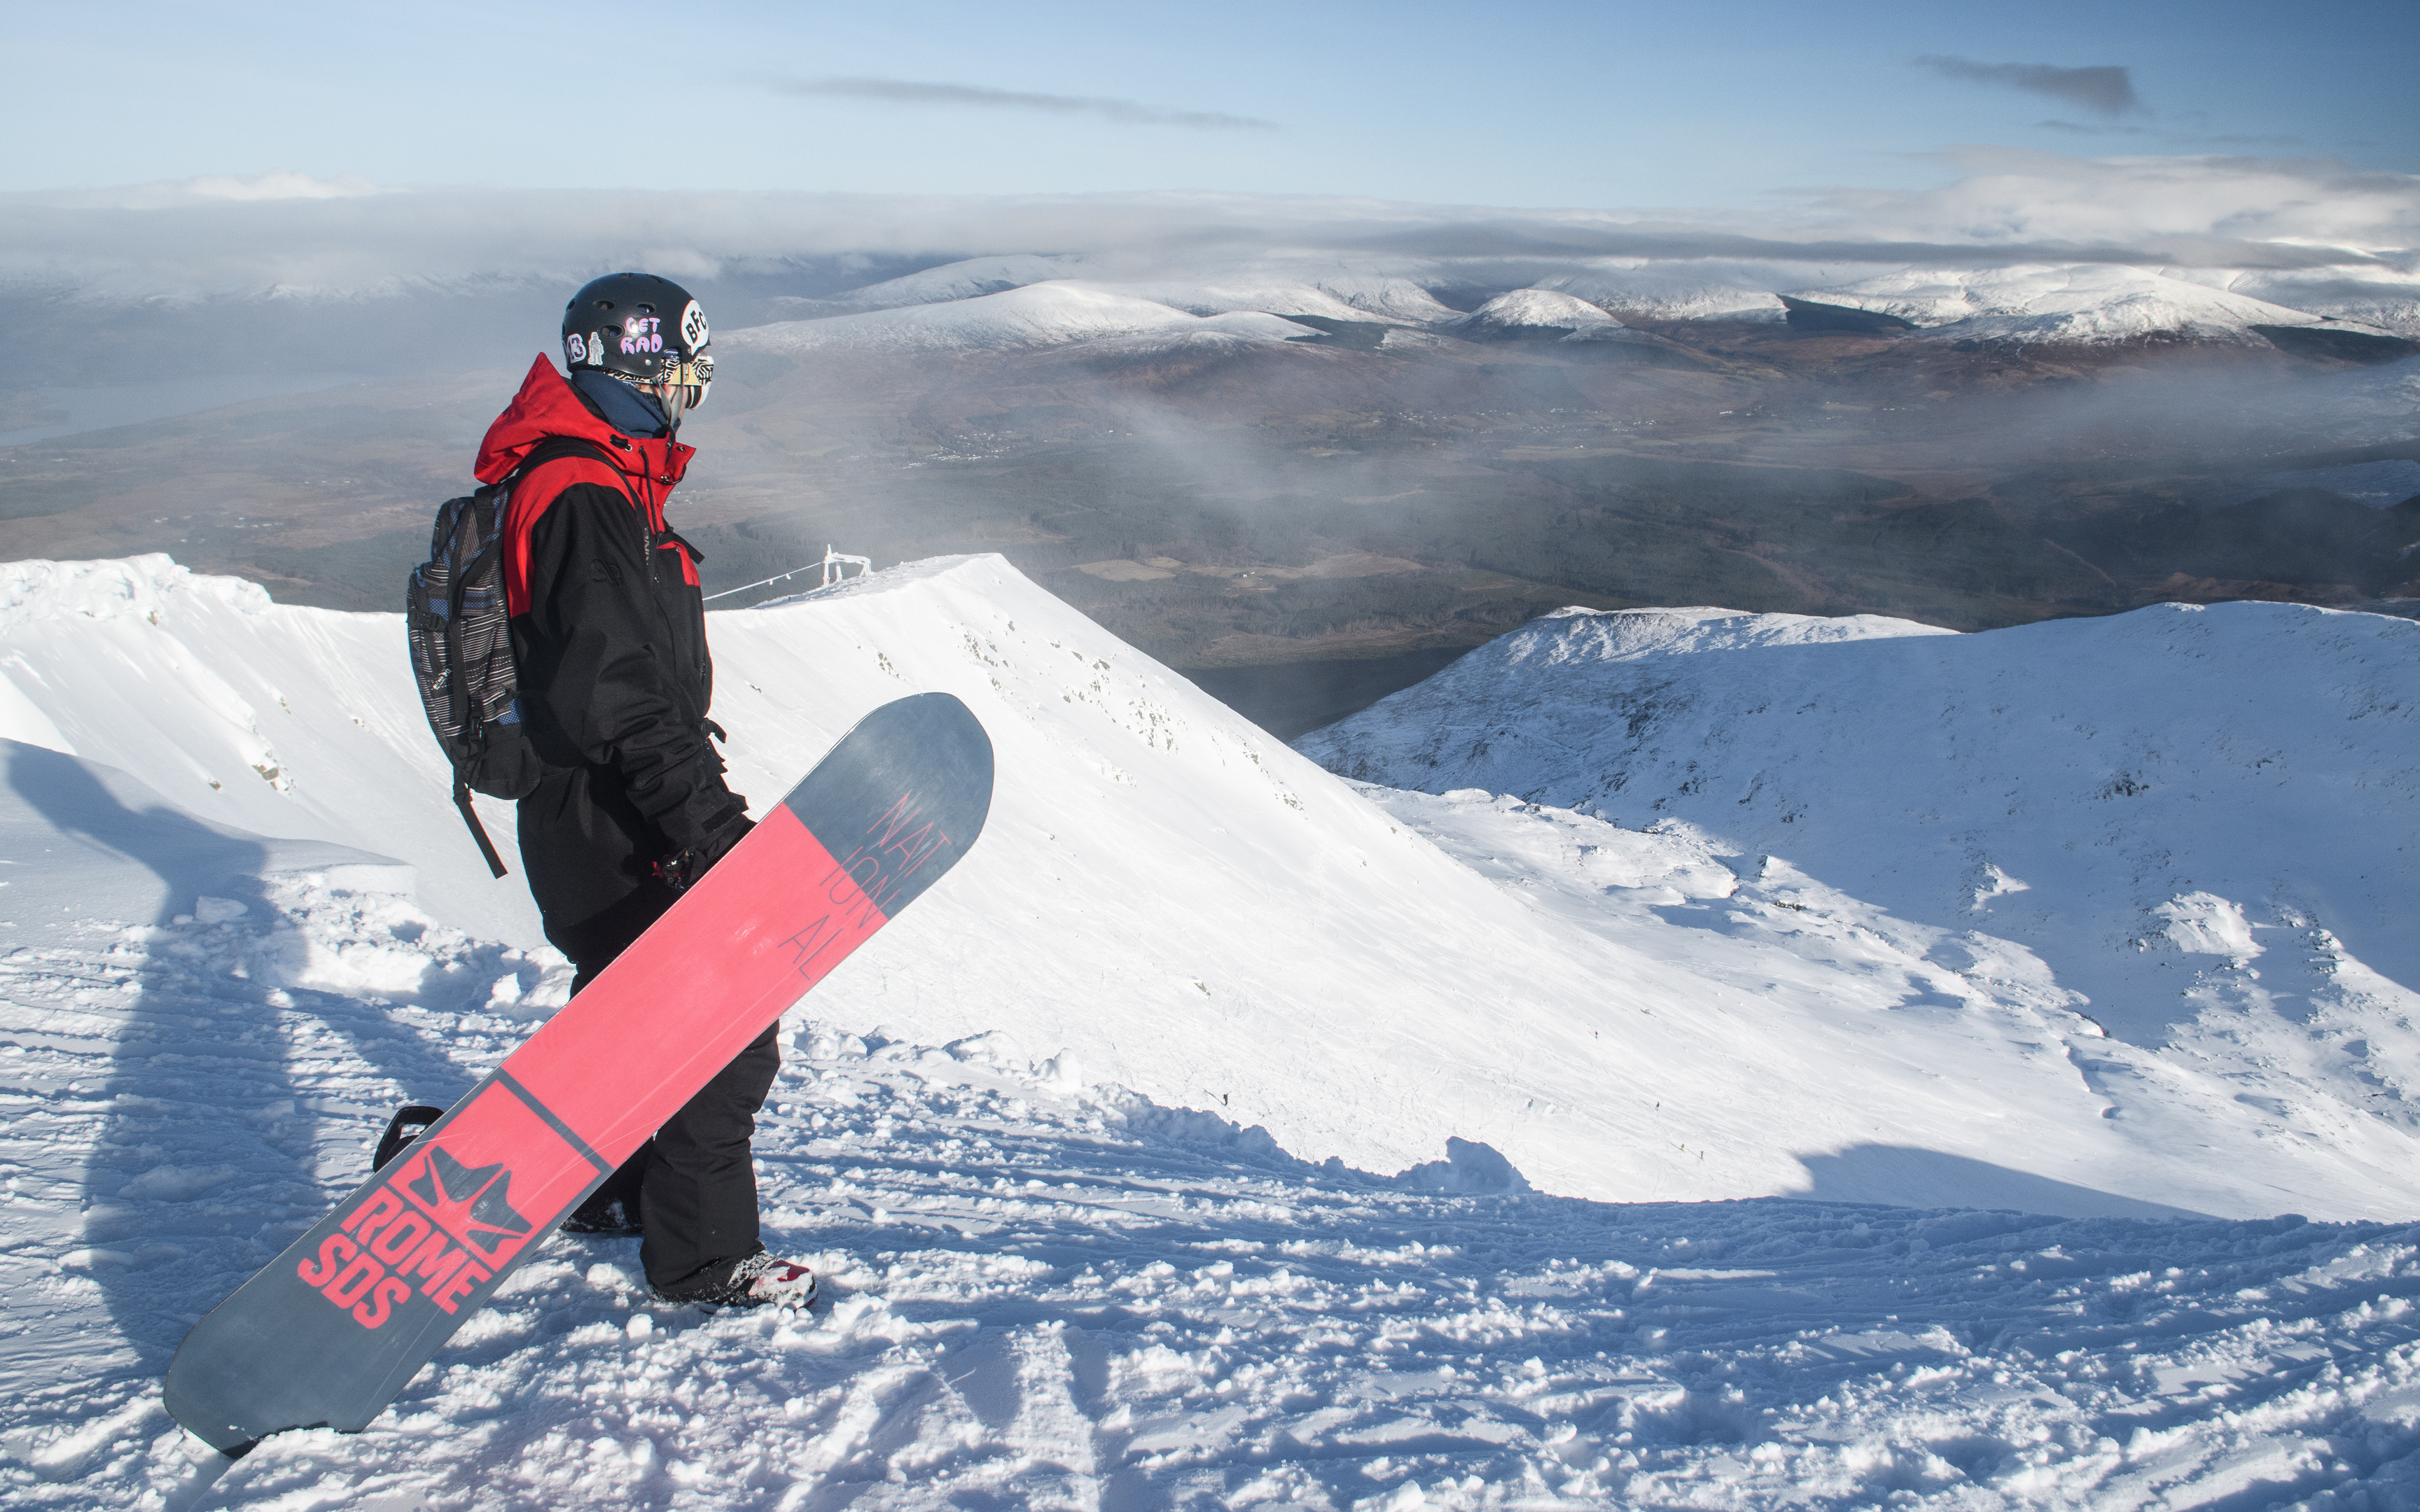 Snowboarder Rhys Crilley from Glasgow, peering into the Back Corries at Nevis Range, Scotland.
Picture: Steven McKenna Photography